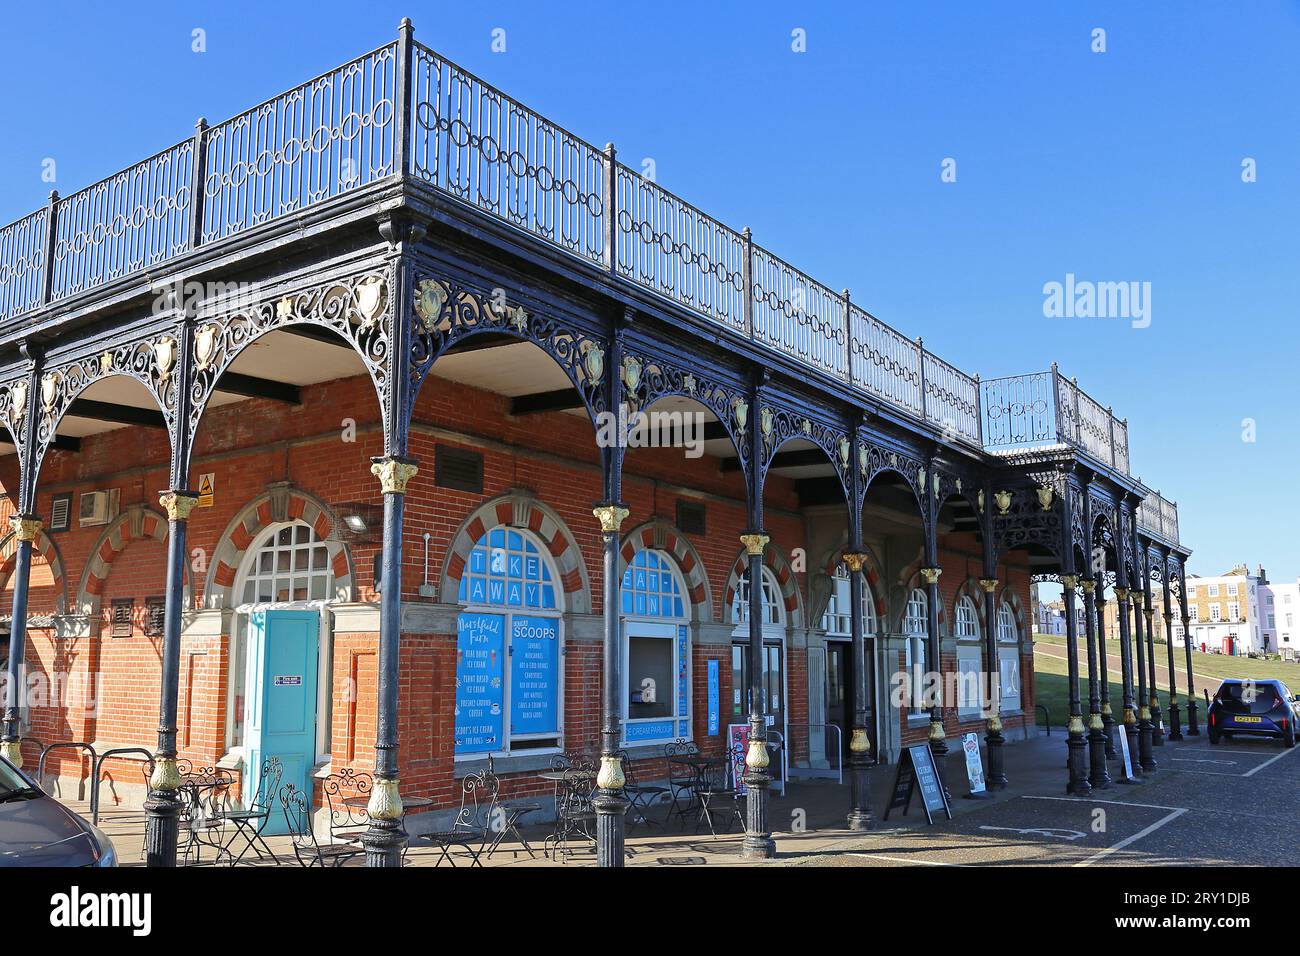 King's Hall events venue, Beacon Hill, Herne Bay, Kent, England, Great Britain, United Kingdom, UK, Europe Stock Photo